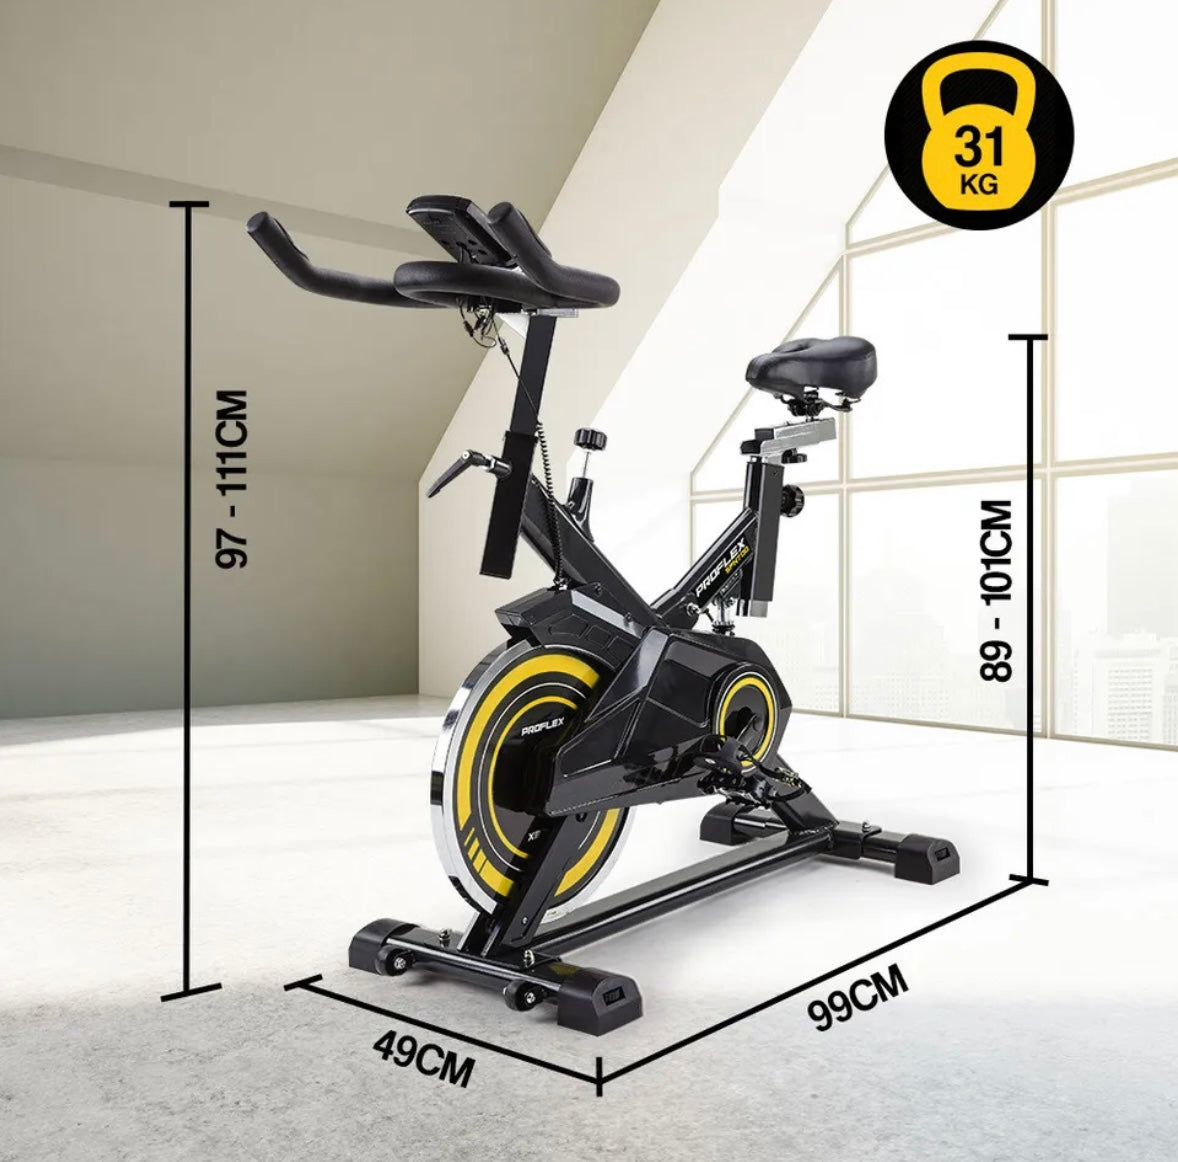 AGFC COMMERCIAL SPIN BIKE